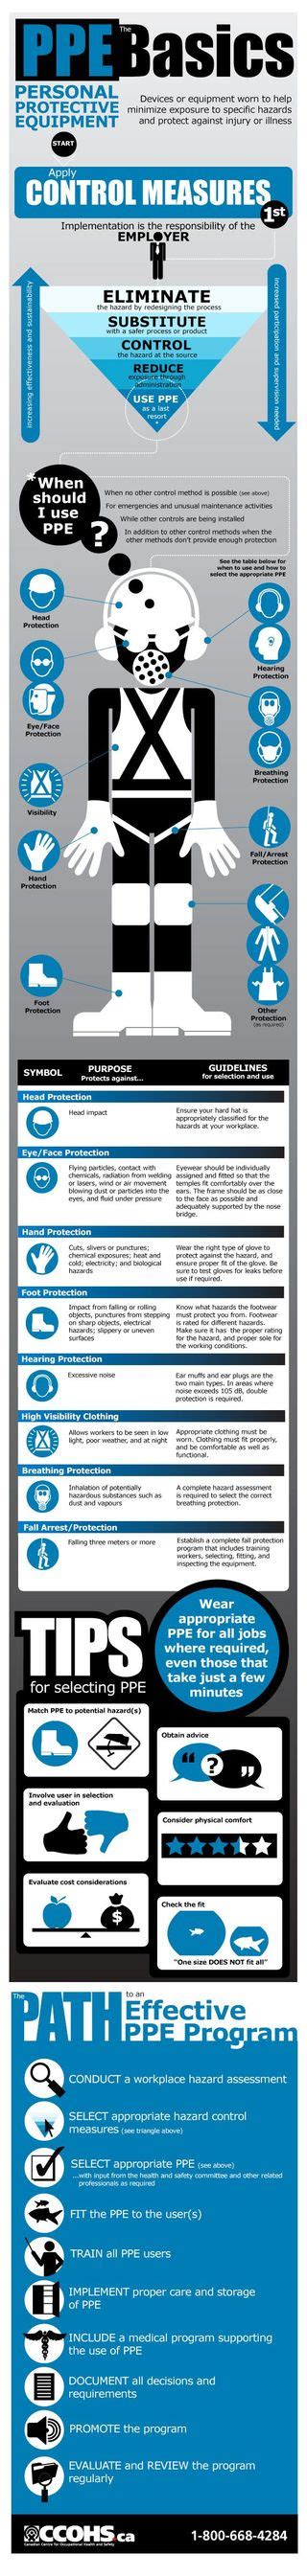 Personal Protective Equipment Ppe An Informative Infographic